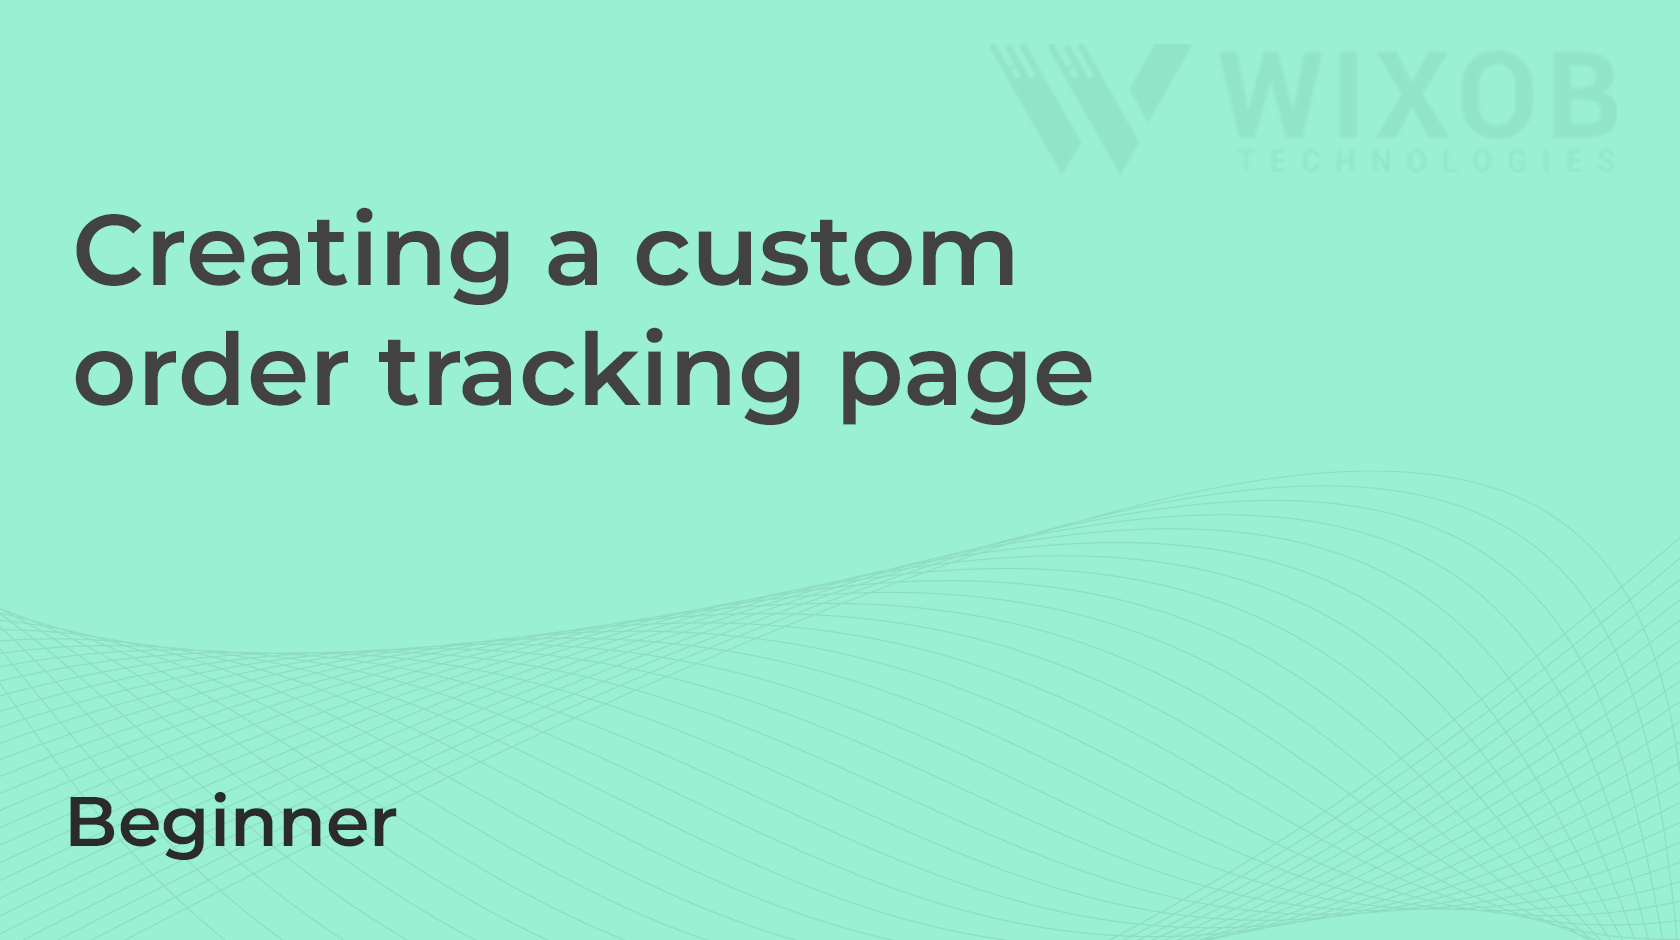 Creating a custom order tracking page